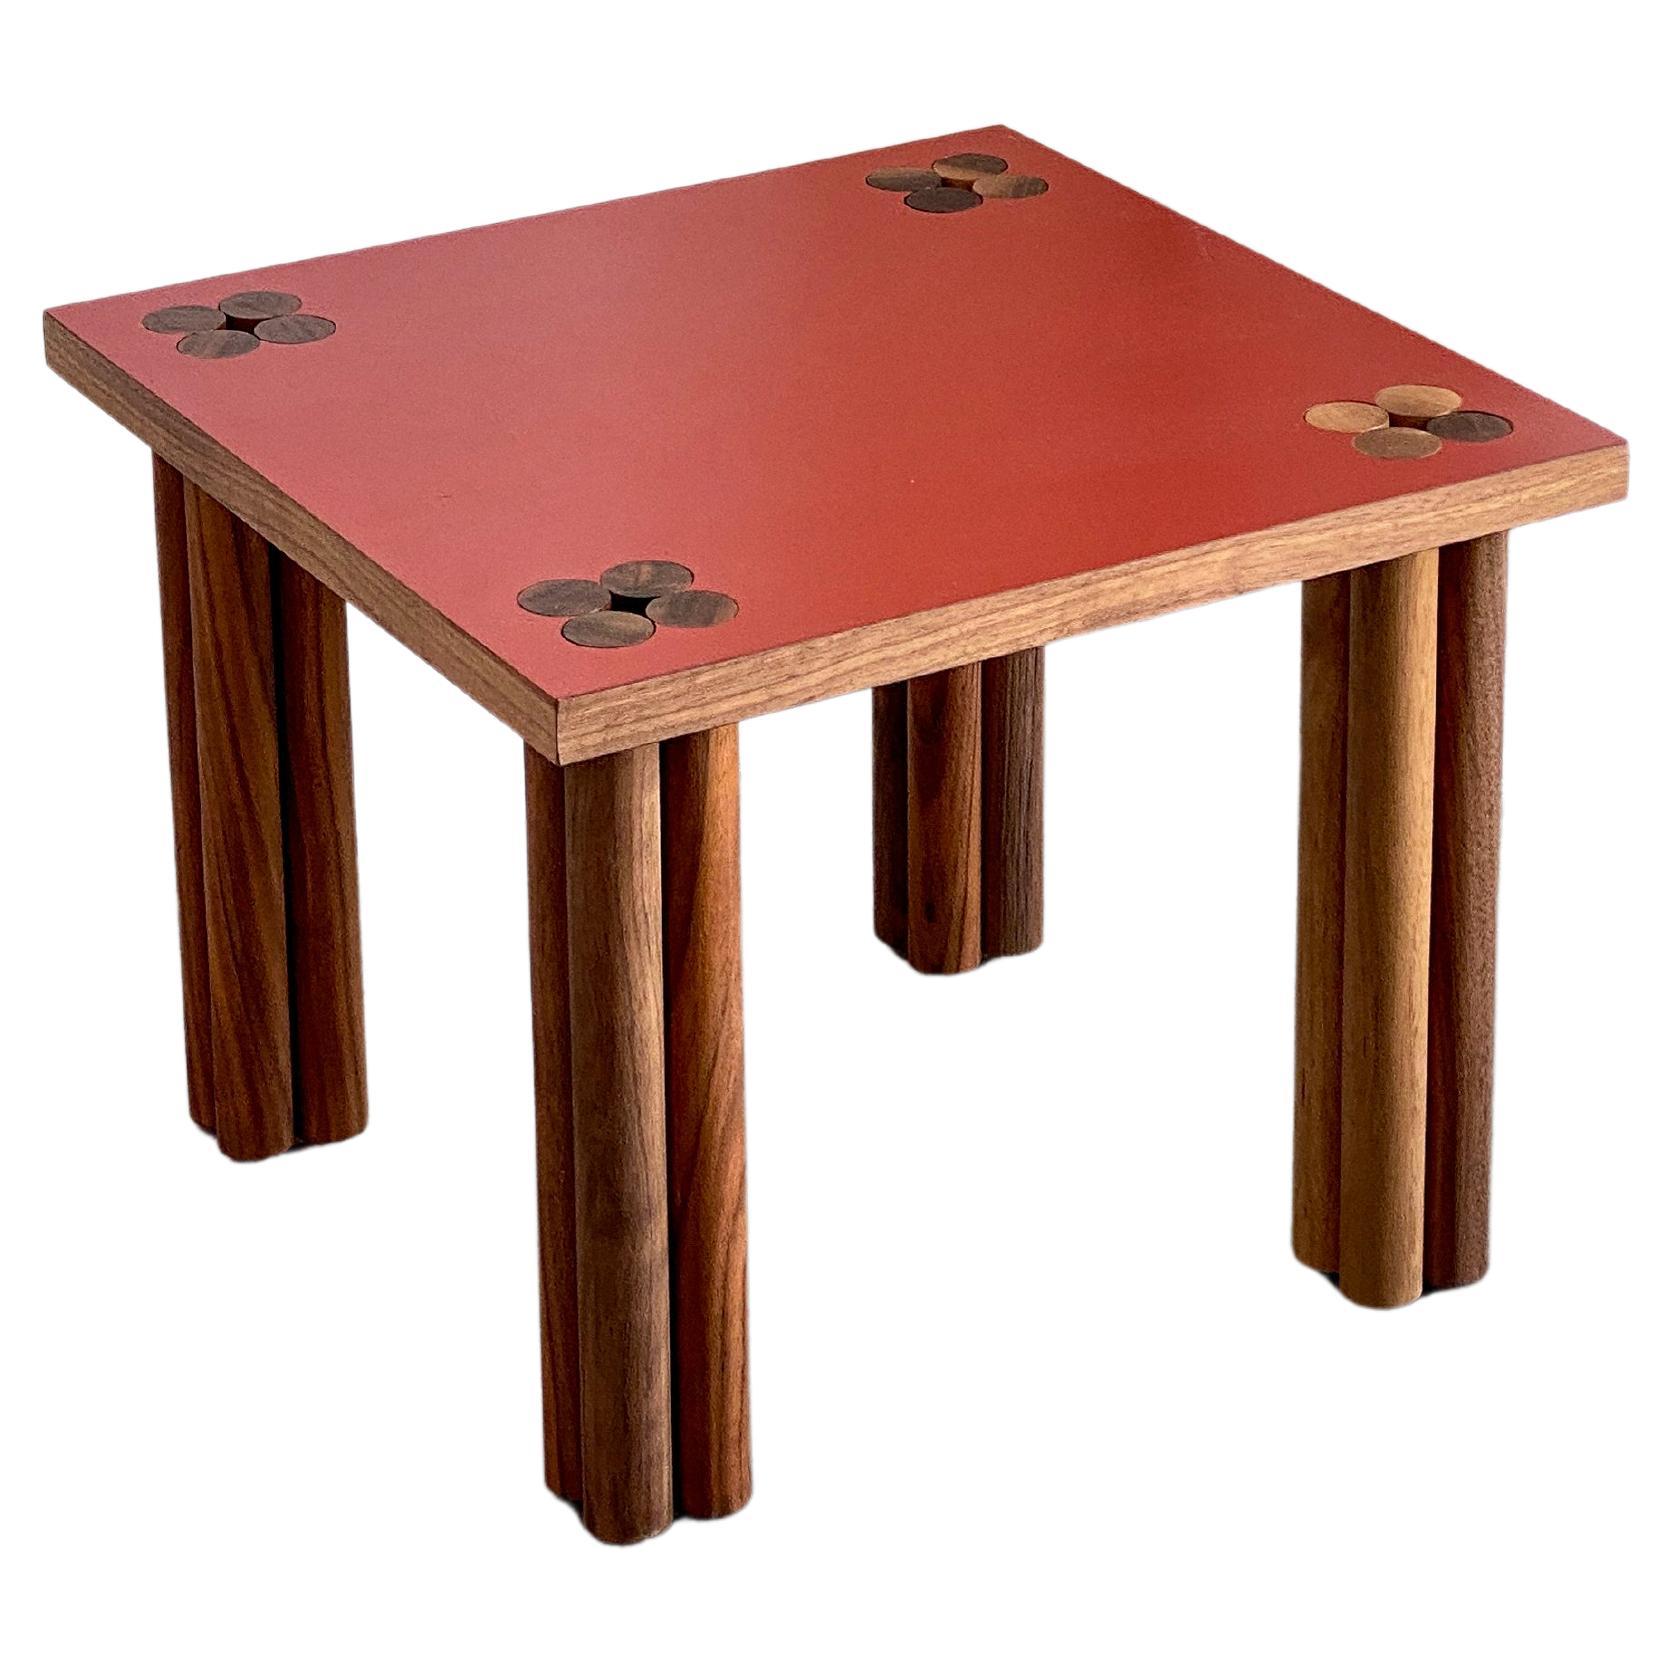 Red Hana Side Table by Tino Seubert For Sale